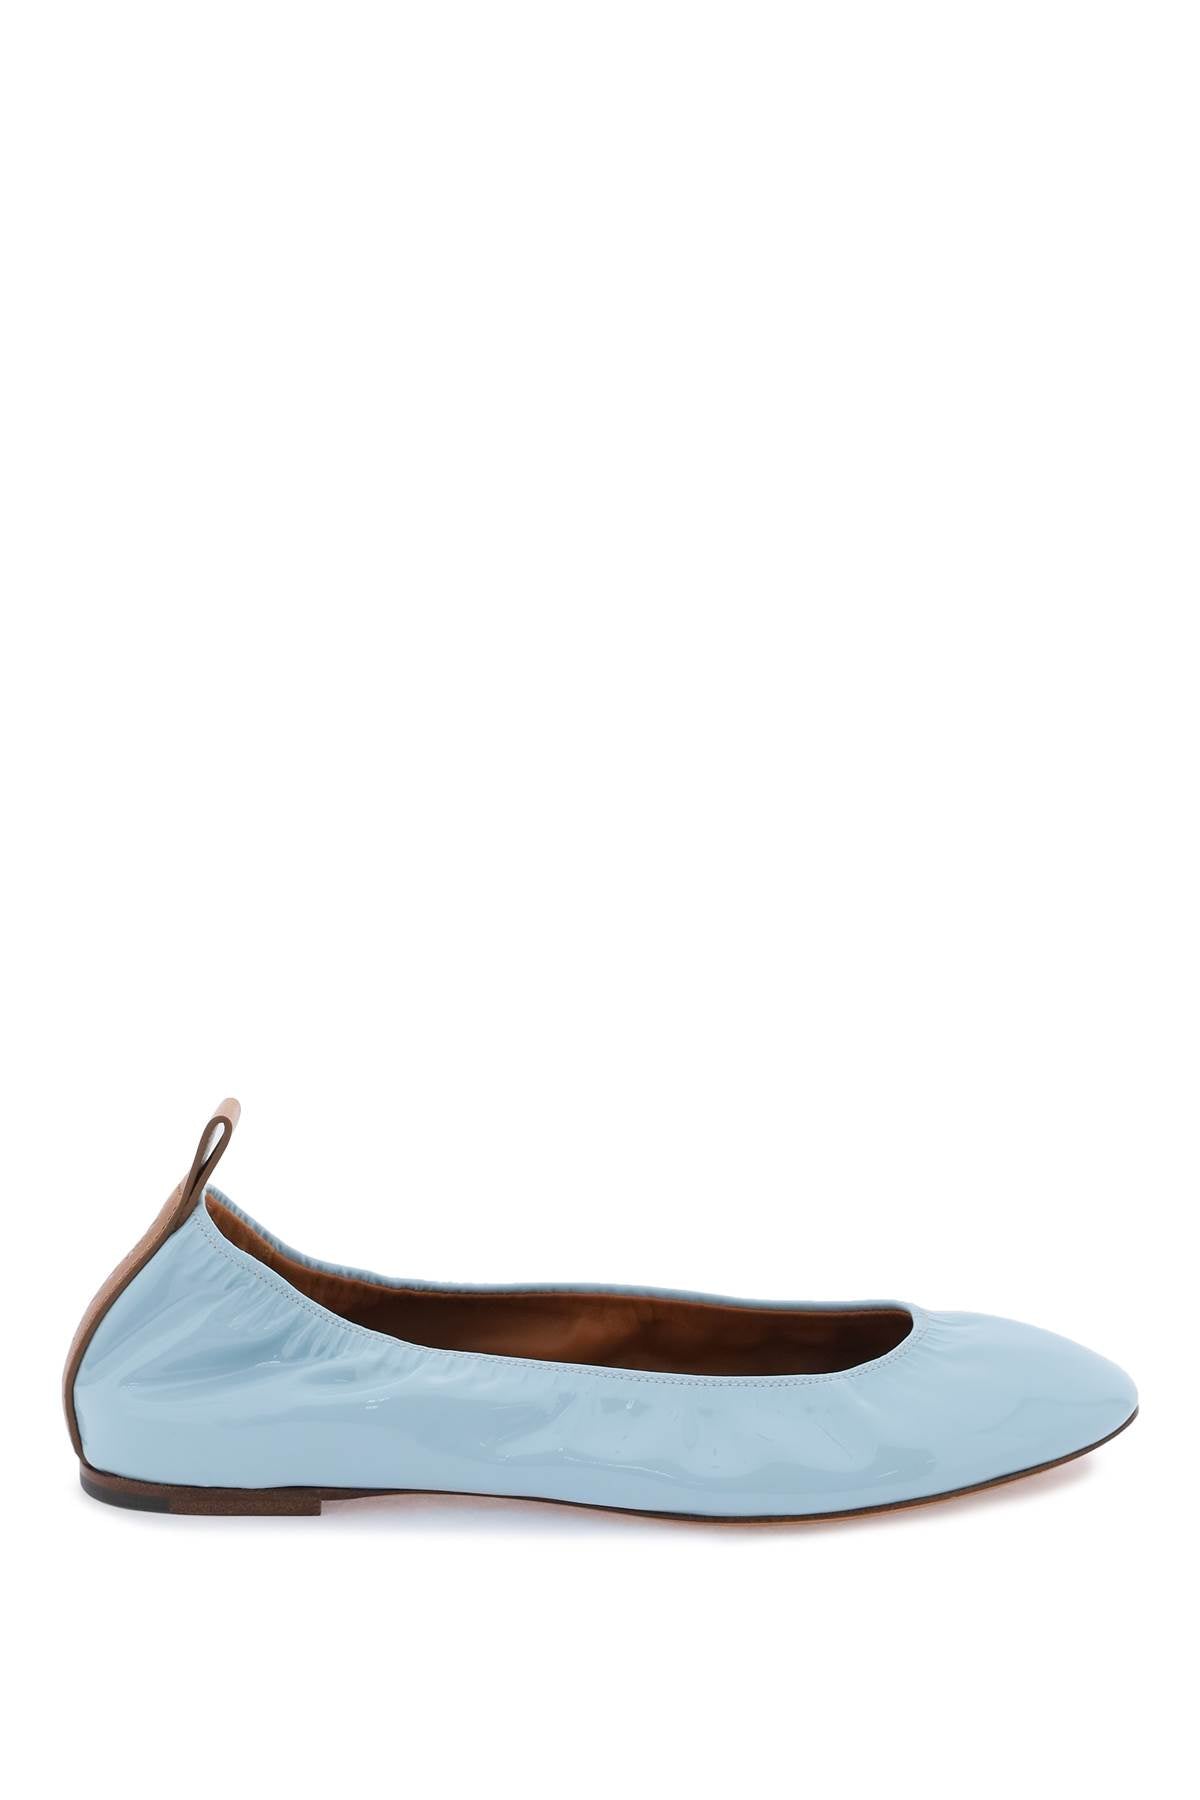 Lanvin the ballerina flat in patent leather-0